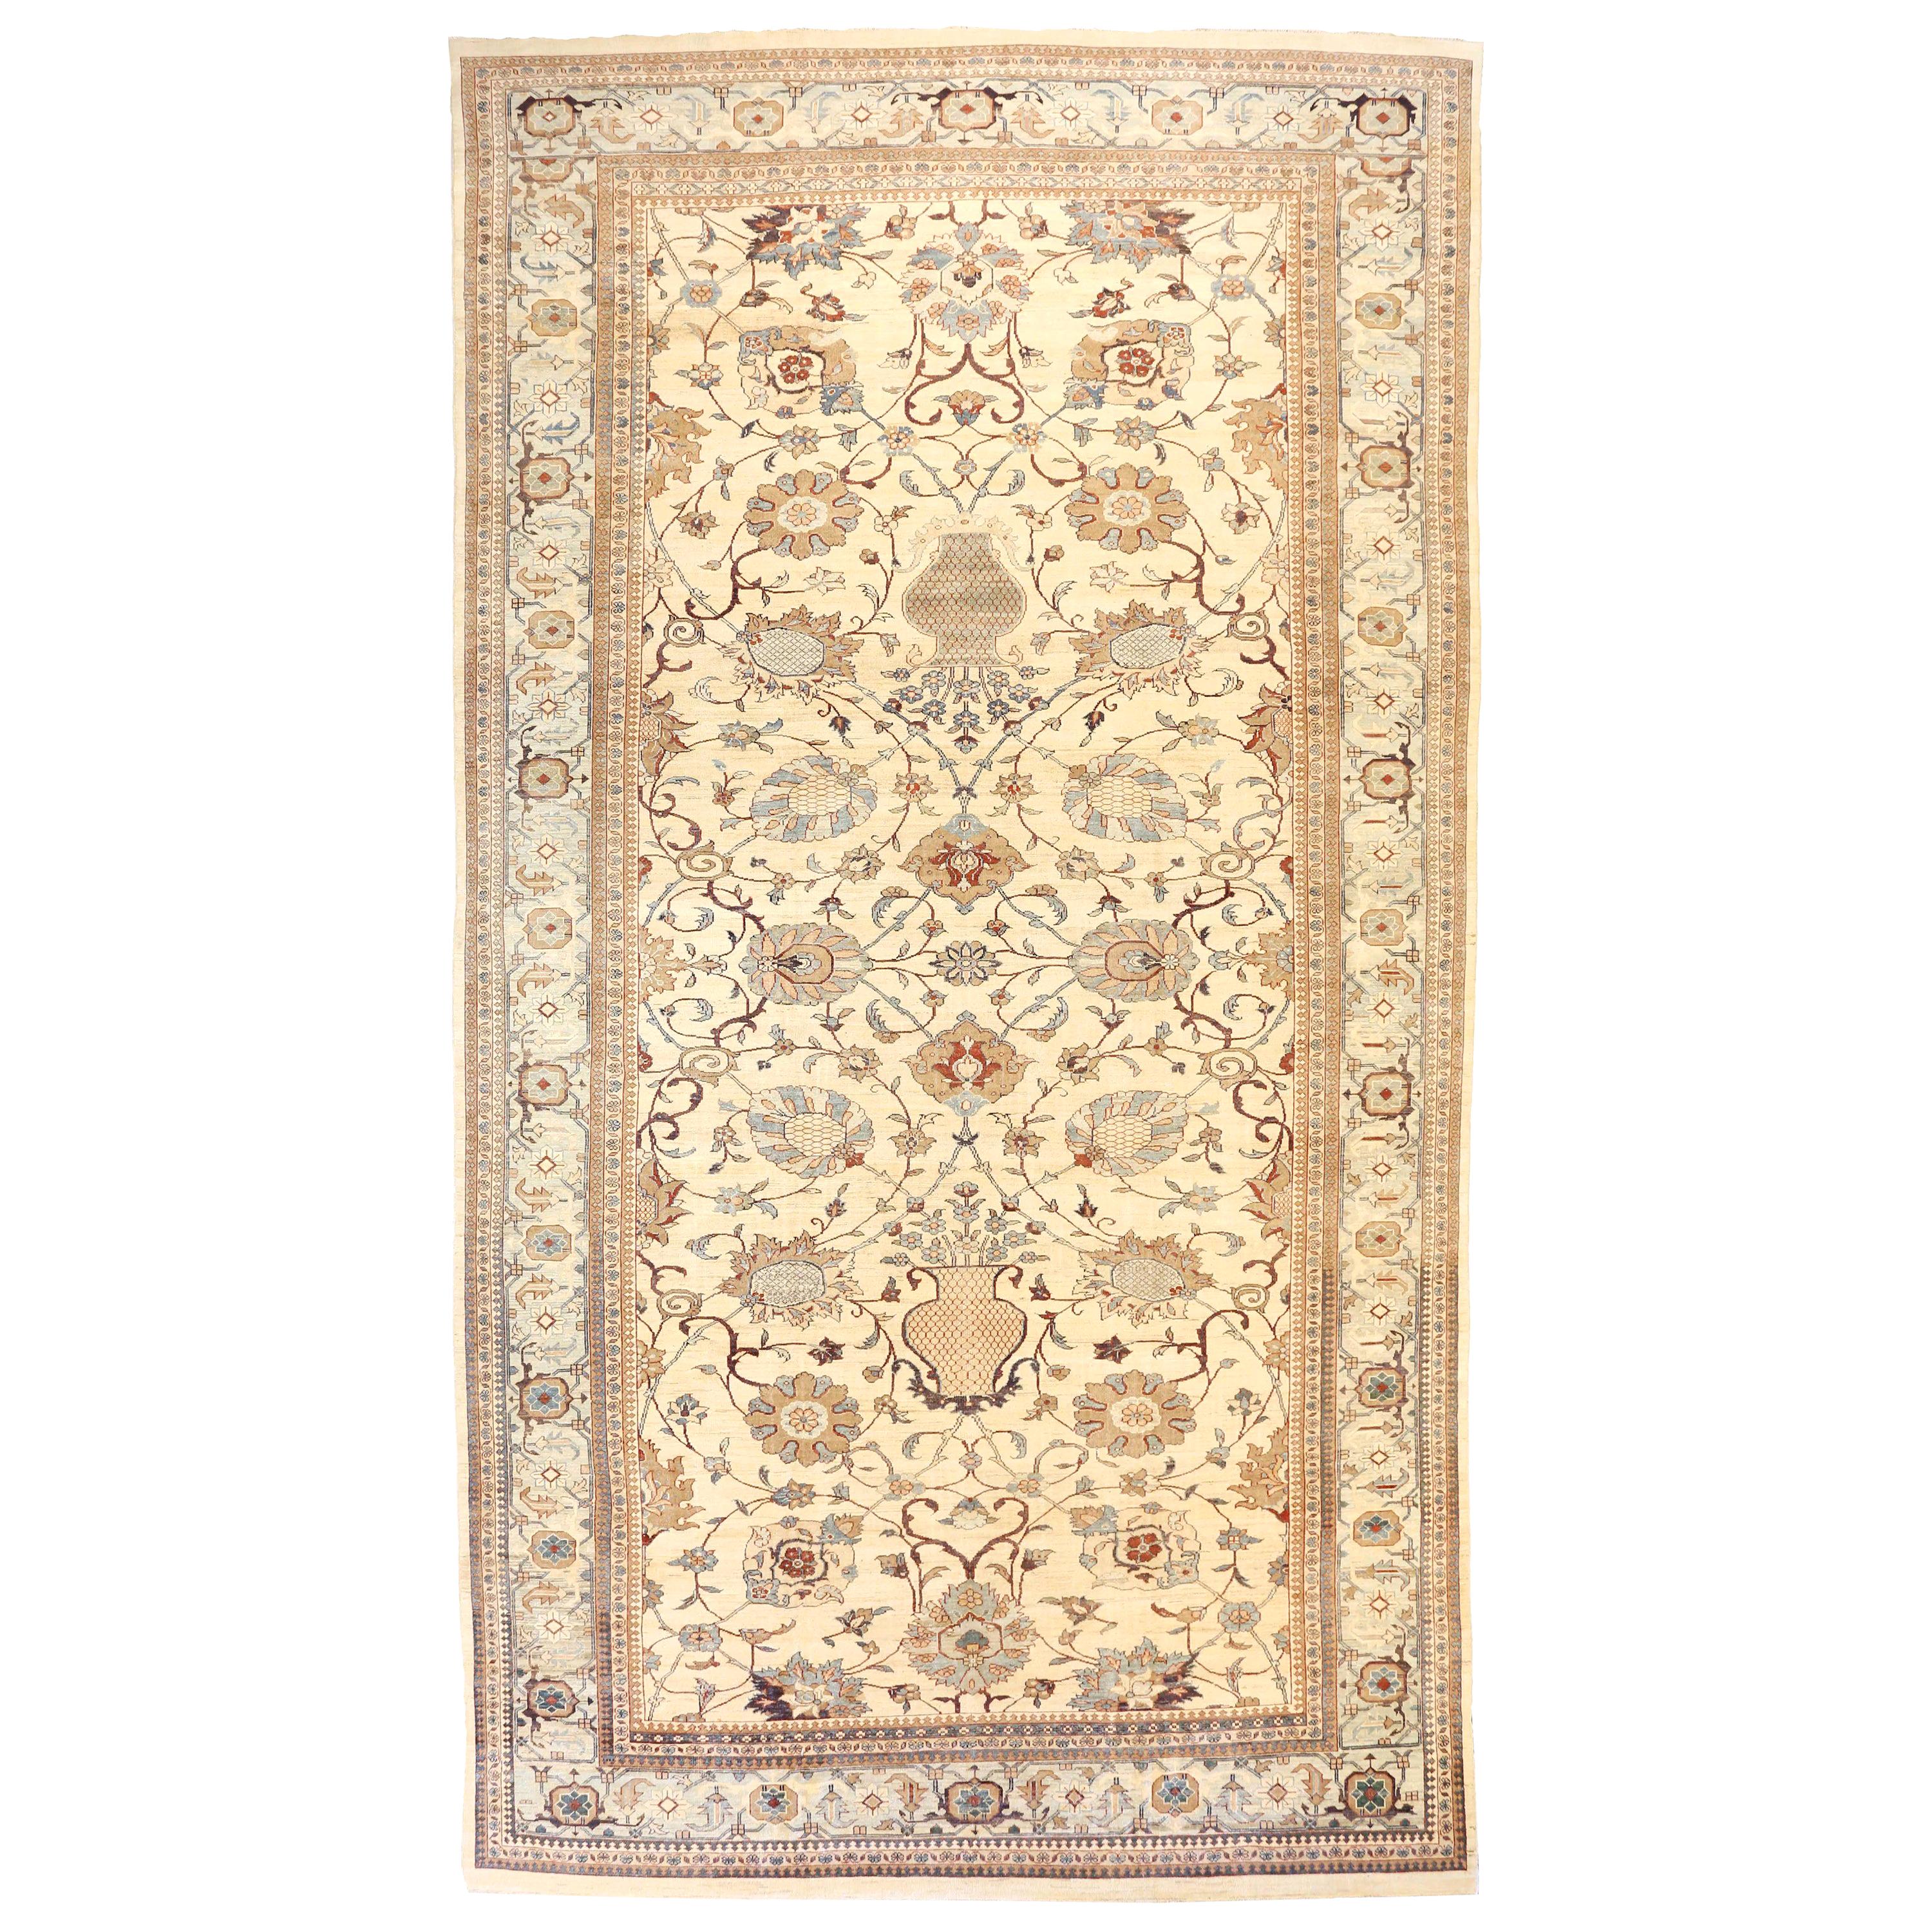 Oversize Turkish Rug in Sultanabad Style with Gray and Brown Floral Details